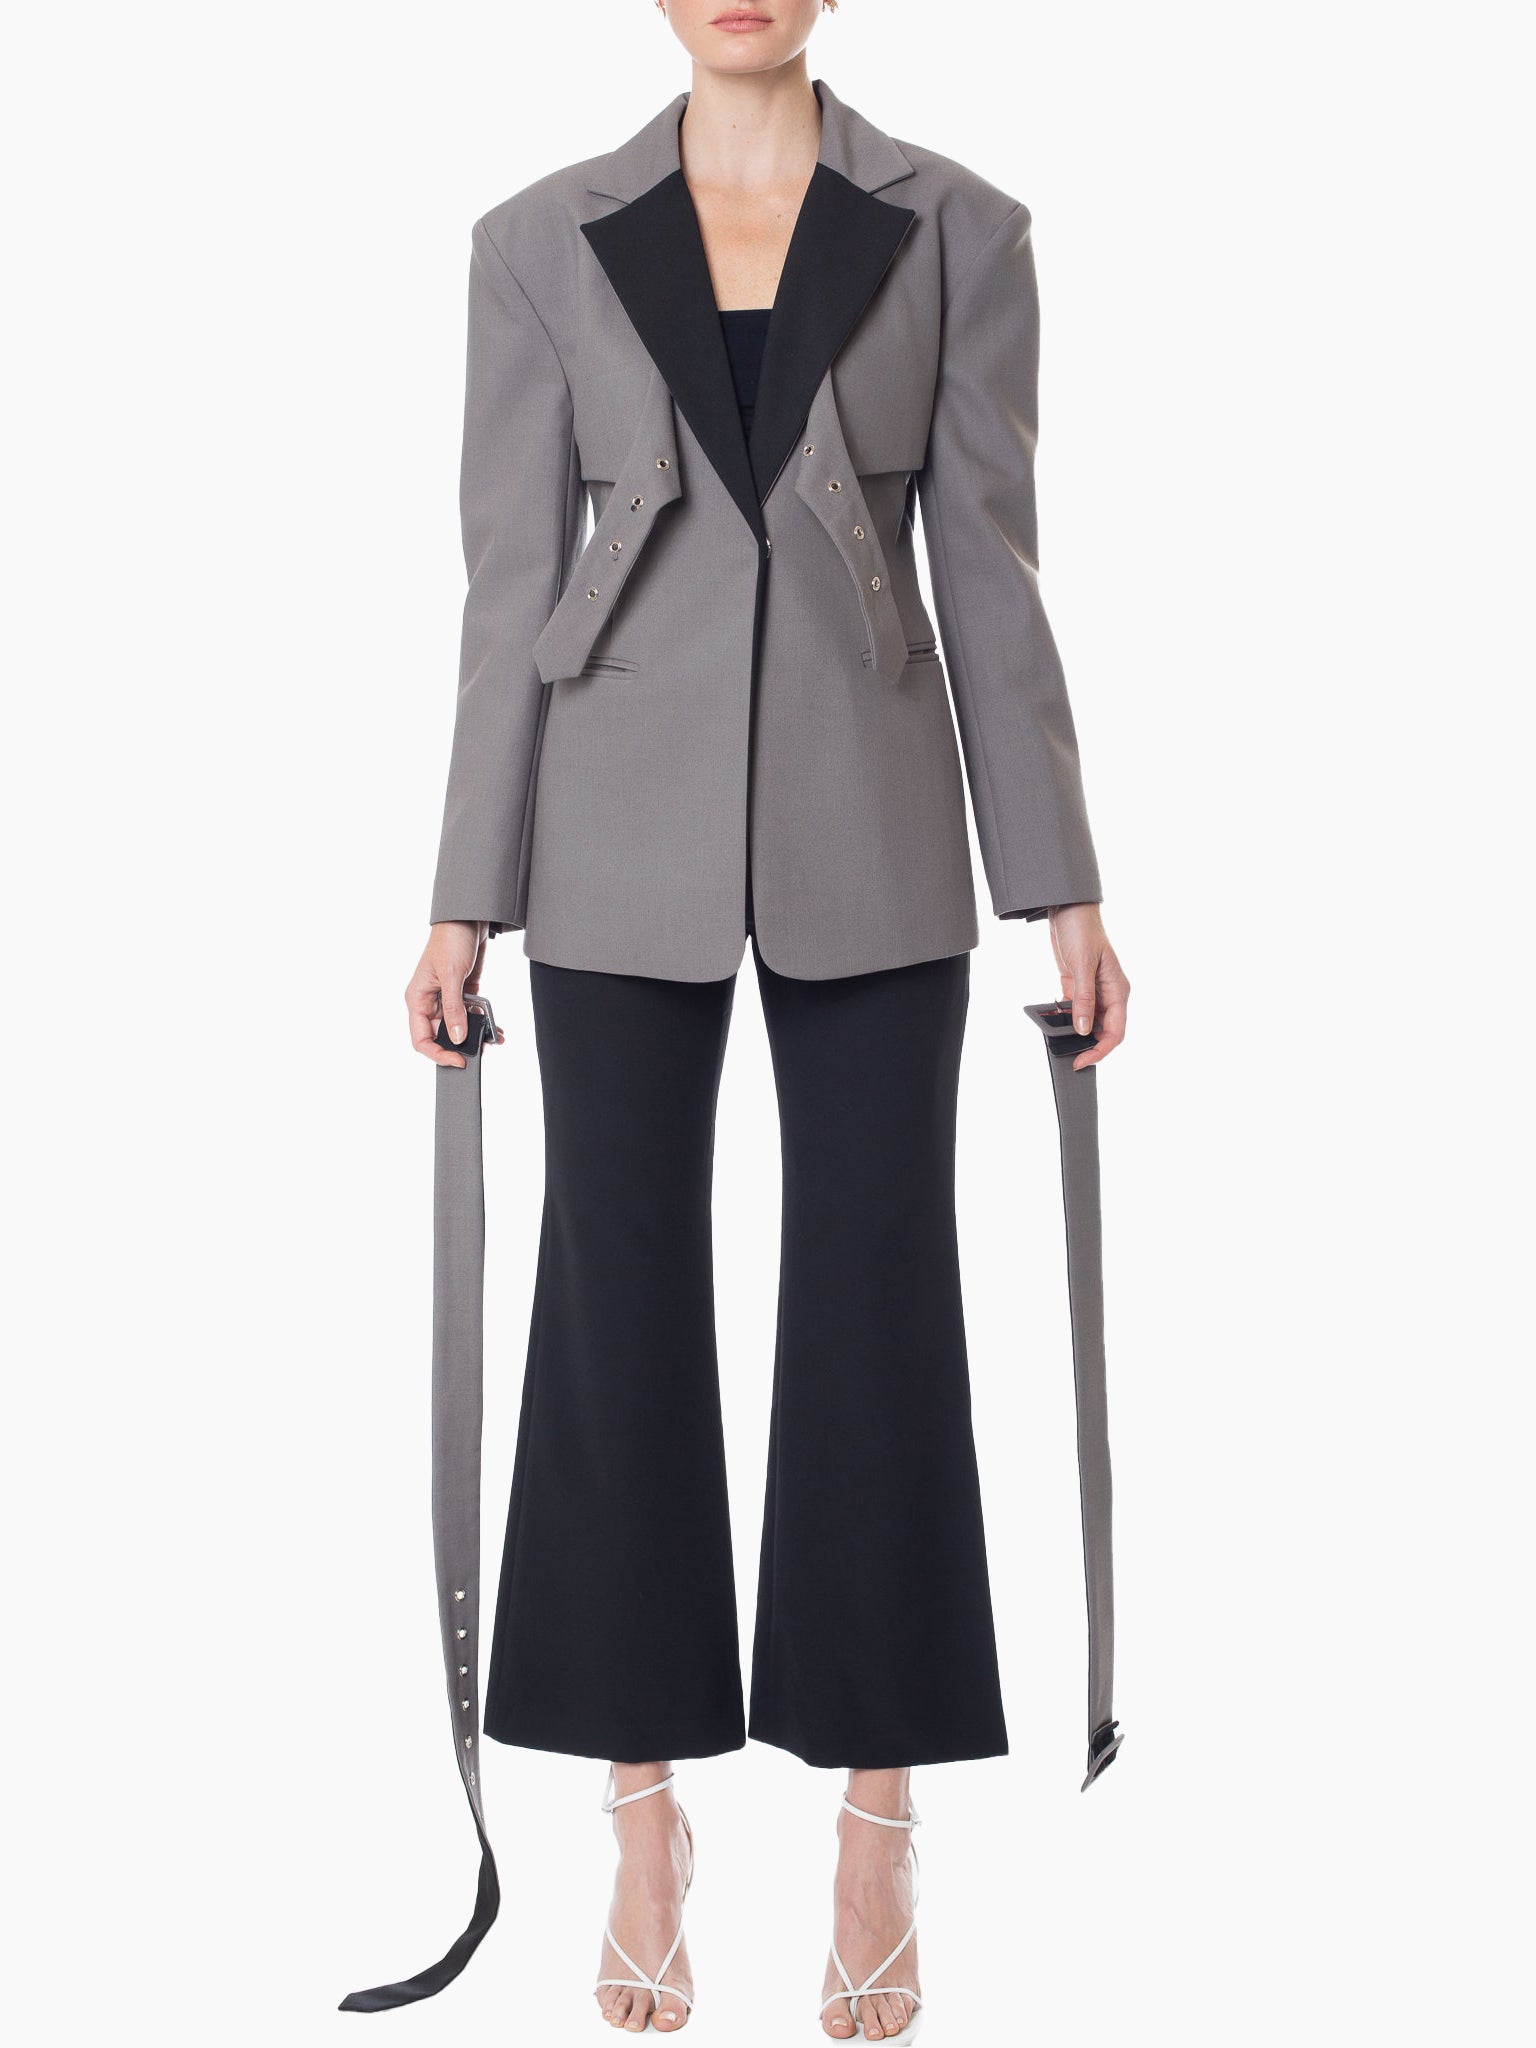 AOTC Double Belted Blazer